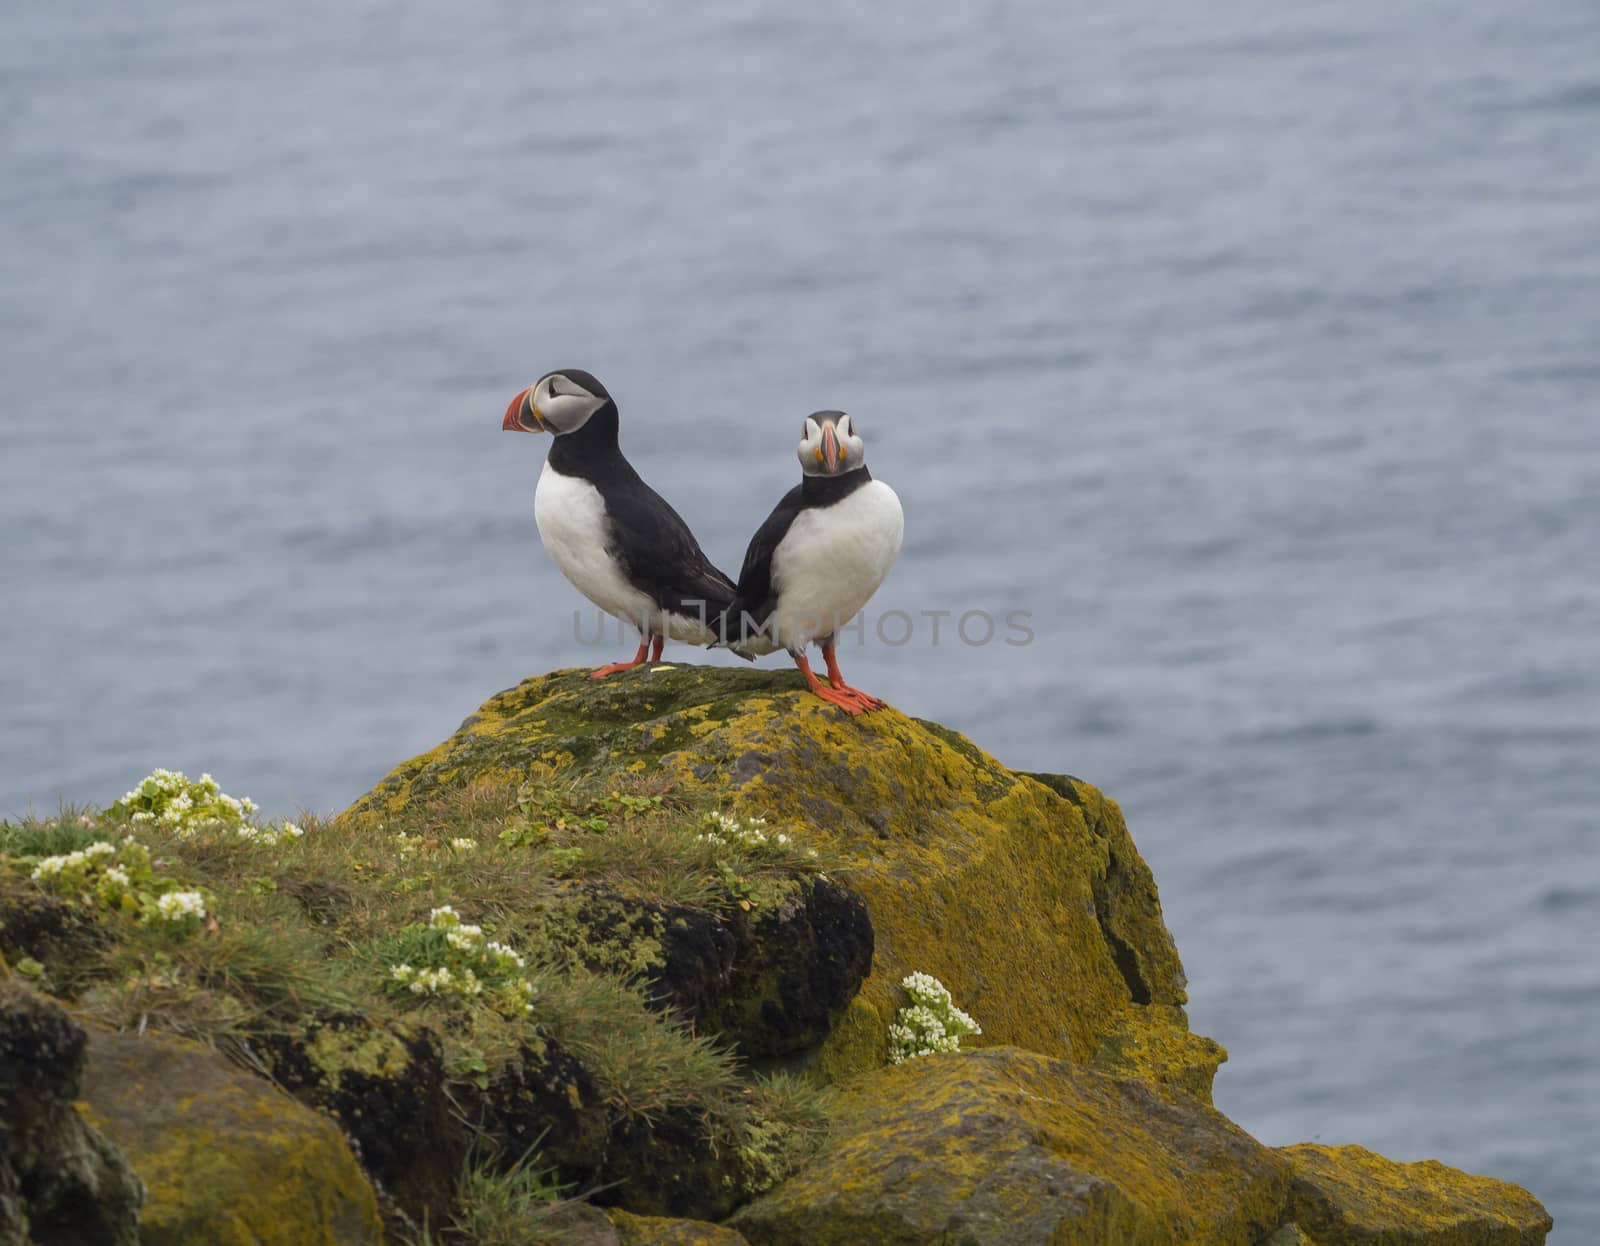 couple of close up Atlantic puffins Fratercula arctica standing on rock of Latrabjarg bird cliffs, white flowers, blue sea background, selective focus copy space